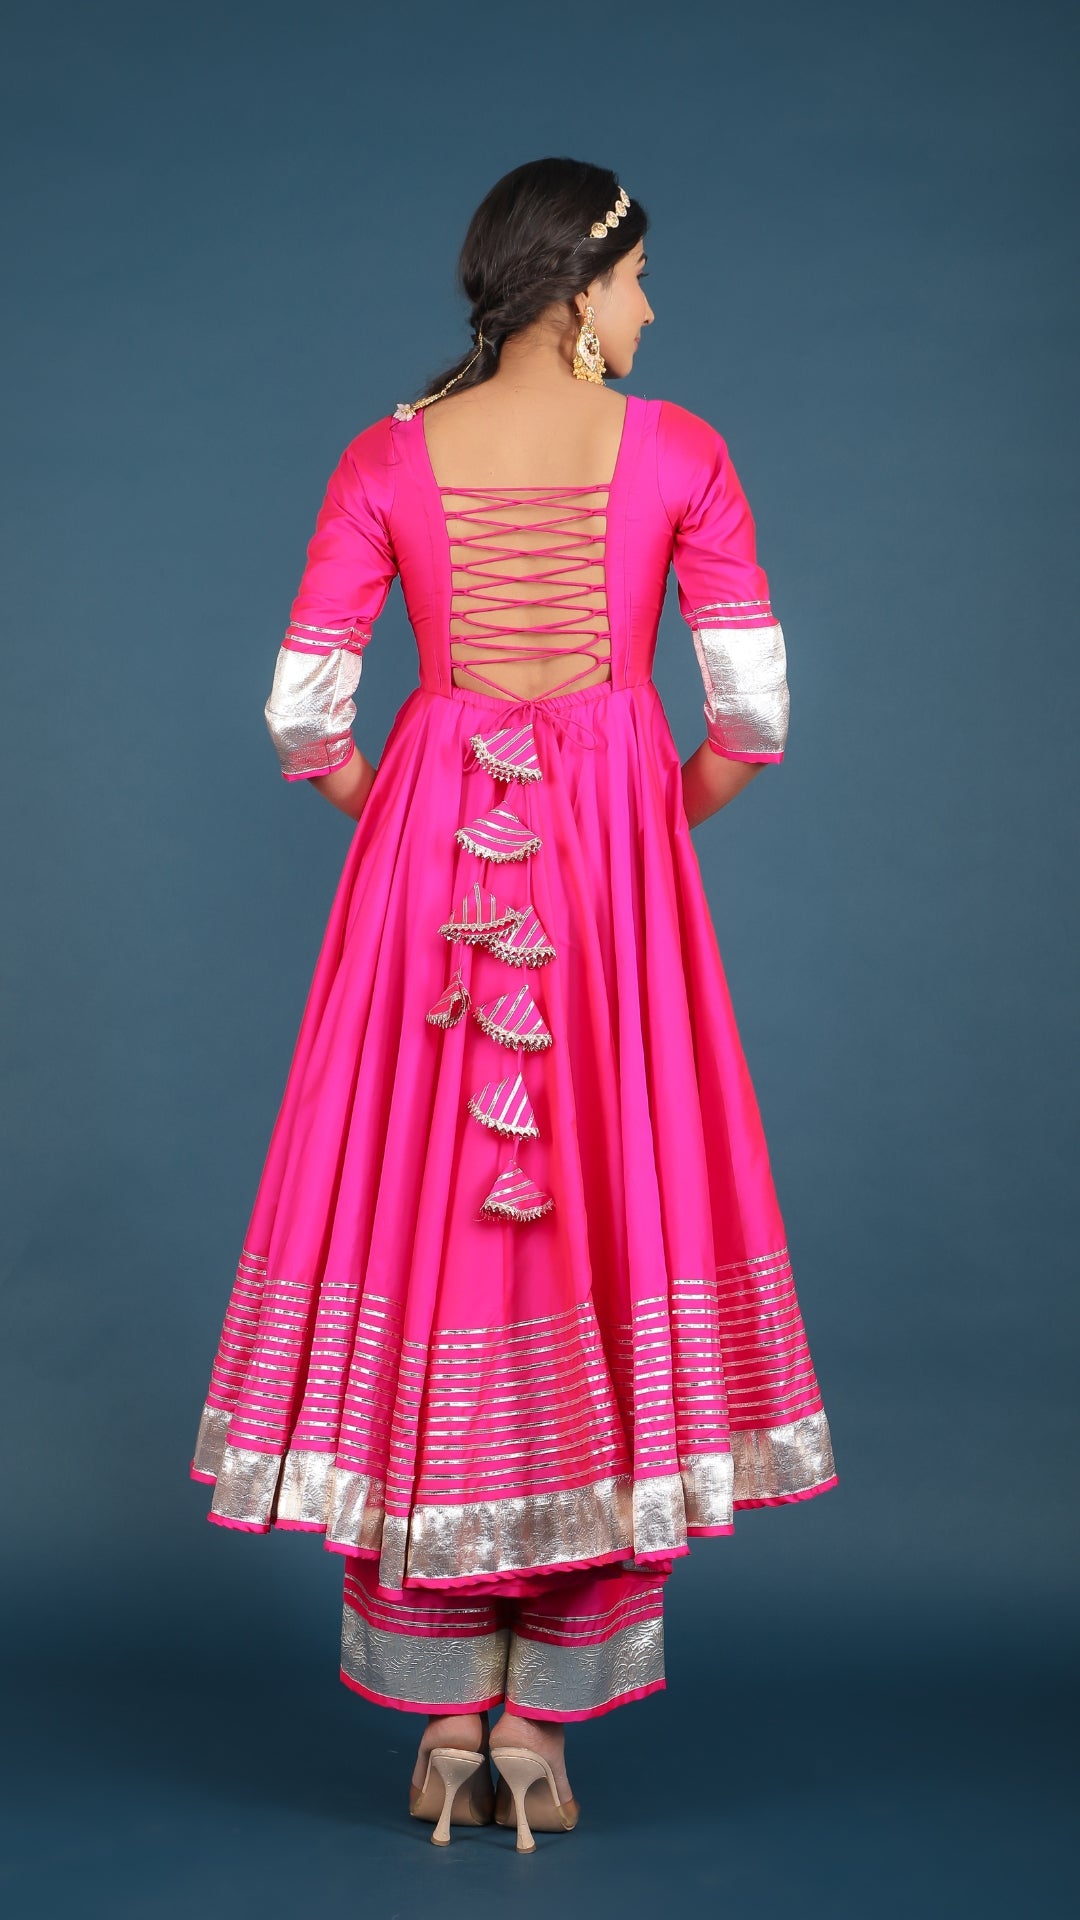 ITSMYCOSTUME Kathak White & Magenta Anarkali Indian Classical Dance Costume  2-3 Years : Amazon.in: Clothing & Accessories